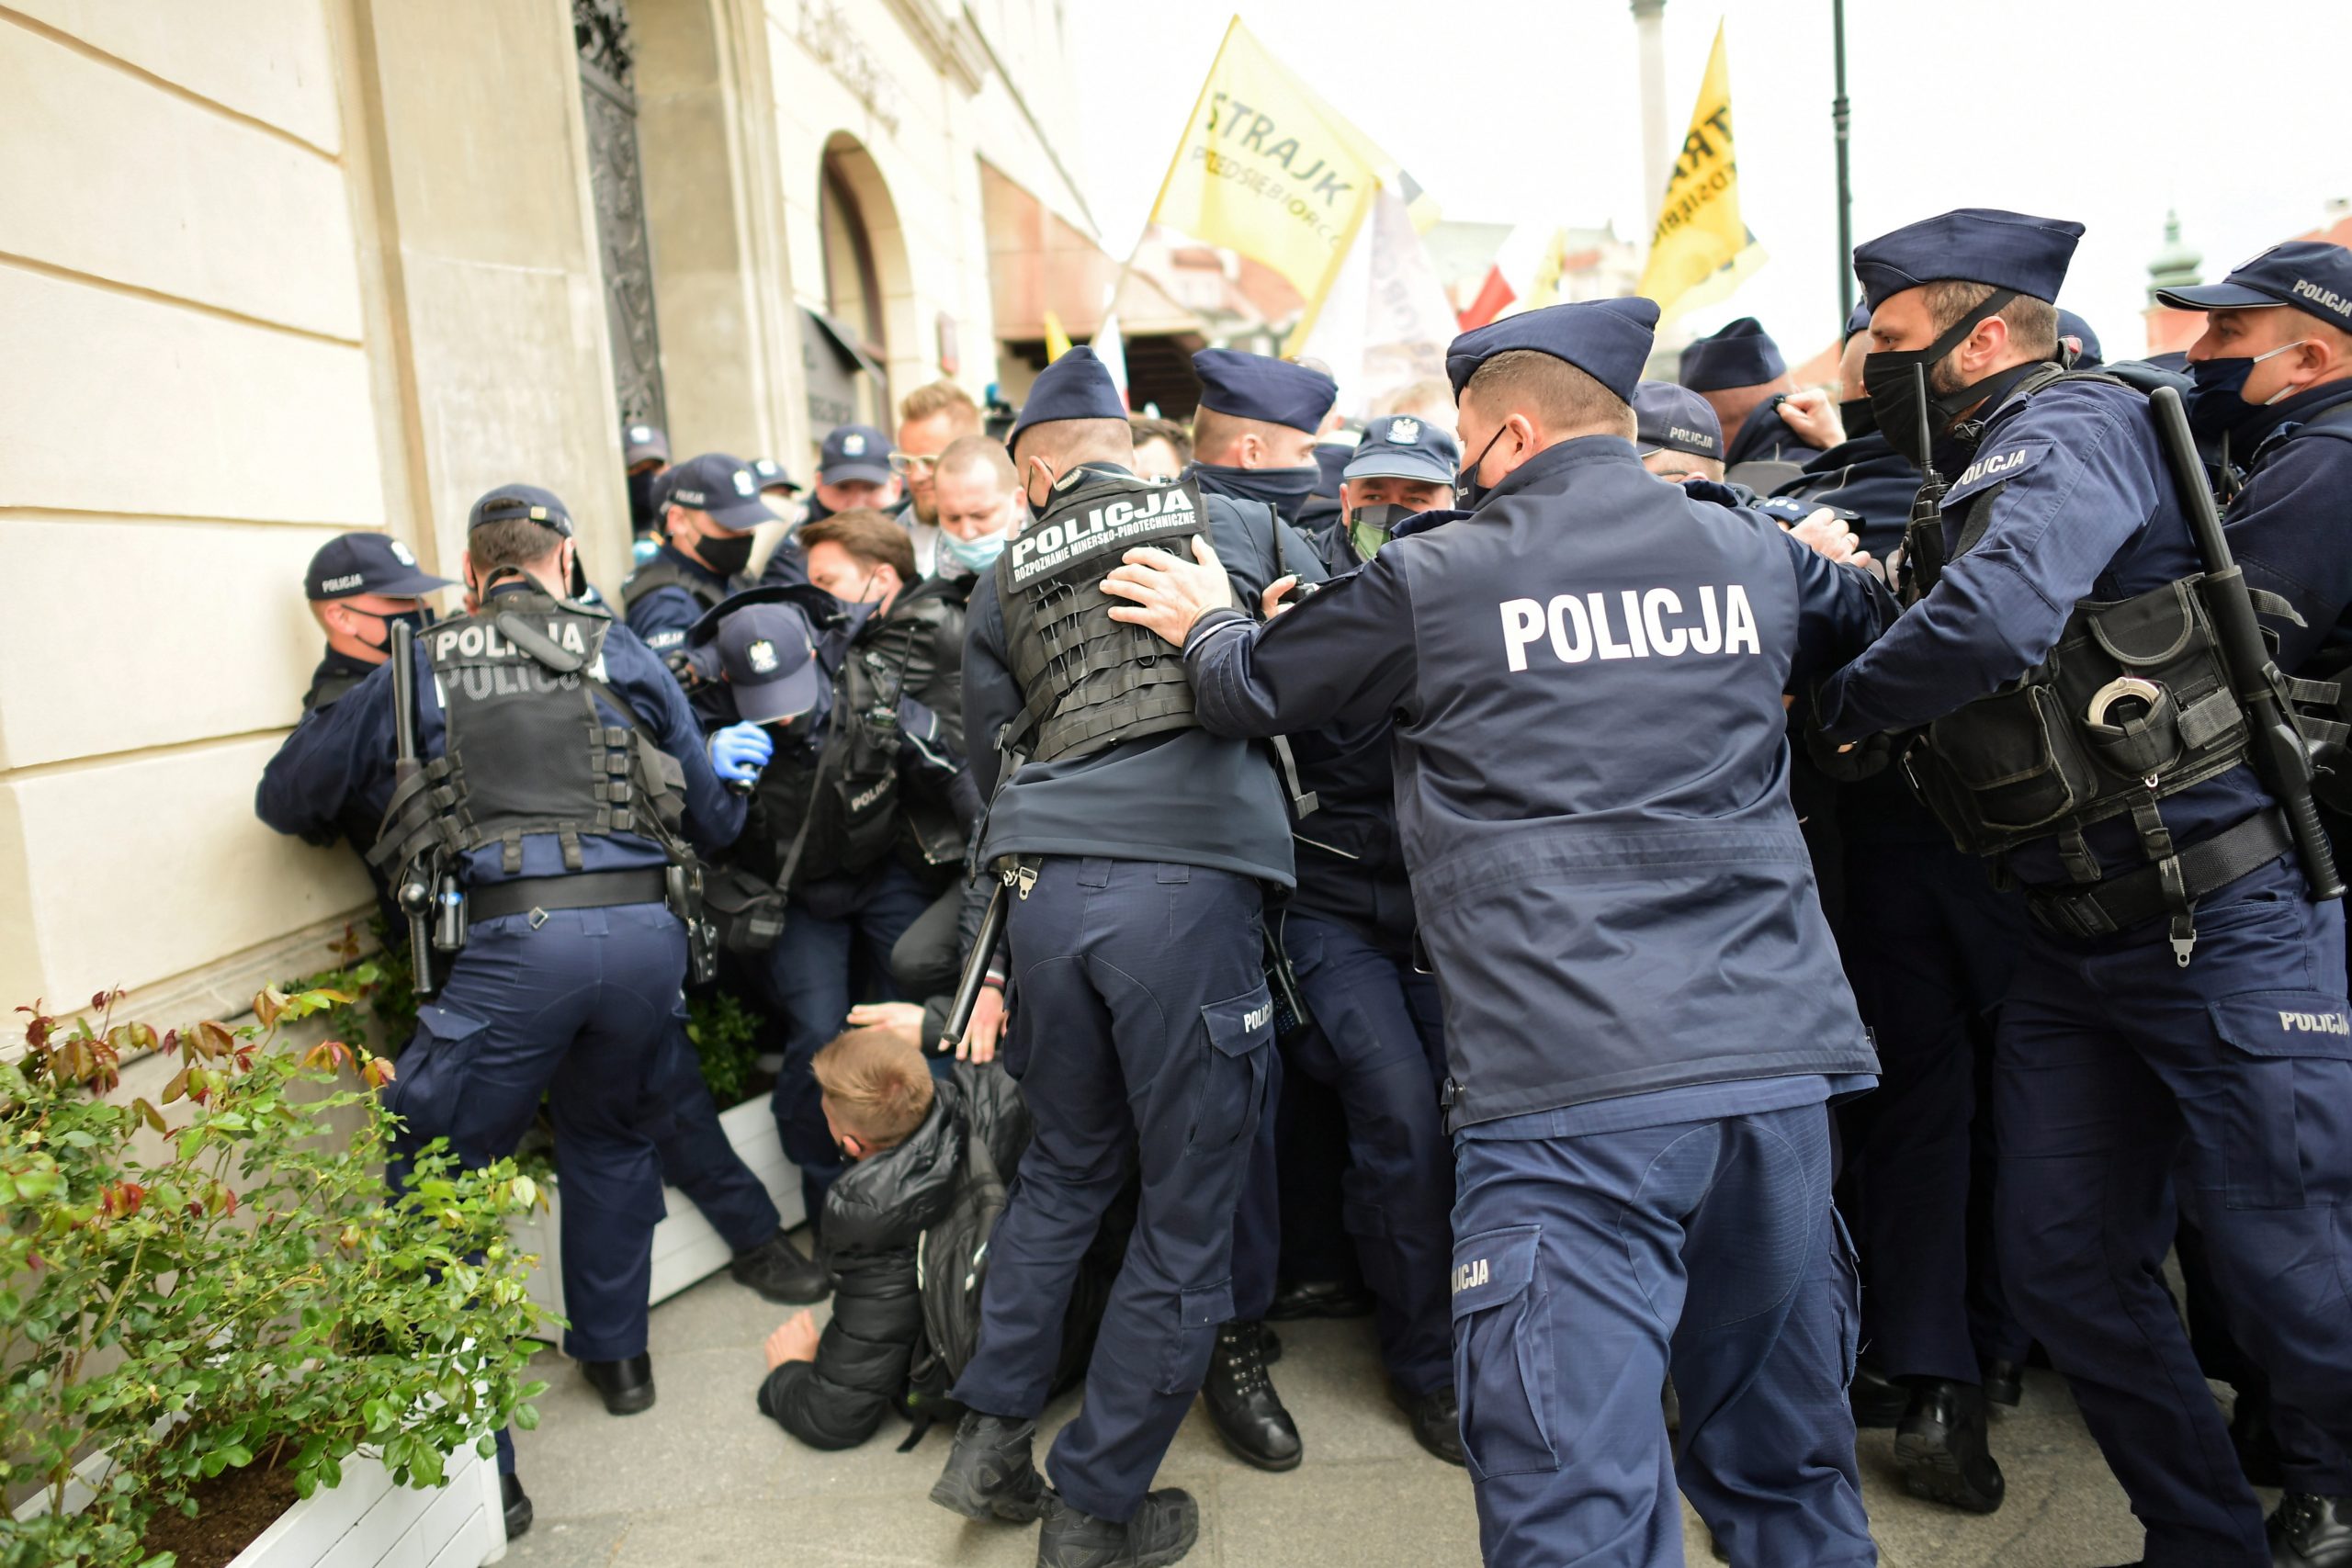 epa08426533 Police scuffles with participant of a so-called 'Entrepreneurs Strike' at the Castle Square in Warsaw, Poland, 16 May 2020. Police emphasized that the assembly was illegal and occasional attacks on officers have been answered by immediate means of coercion such as the use of tear gas and physical strength. The protesters demand a complete unfreezing of the economy after all measures taken to stem the spread of the SARS-CoV-2 coronavirus which causes the COVID-19 disease.  EPA/MARCIN OBARA POLAND OUT